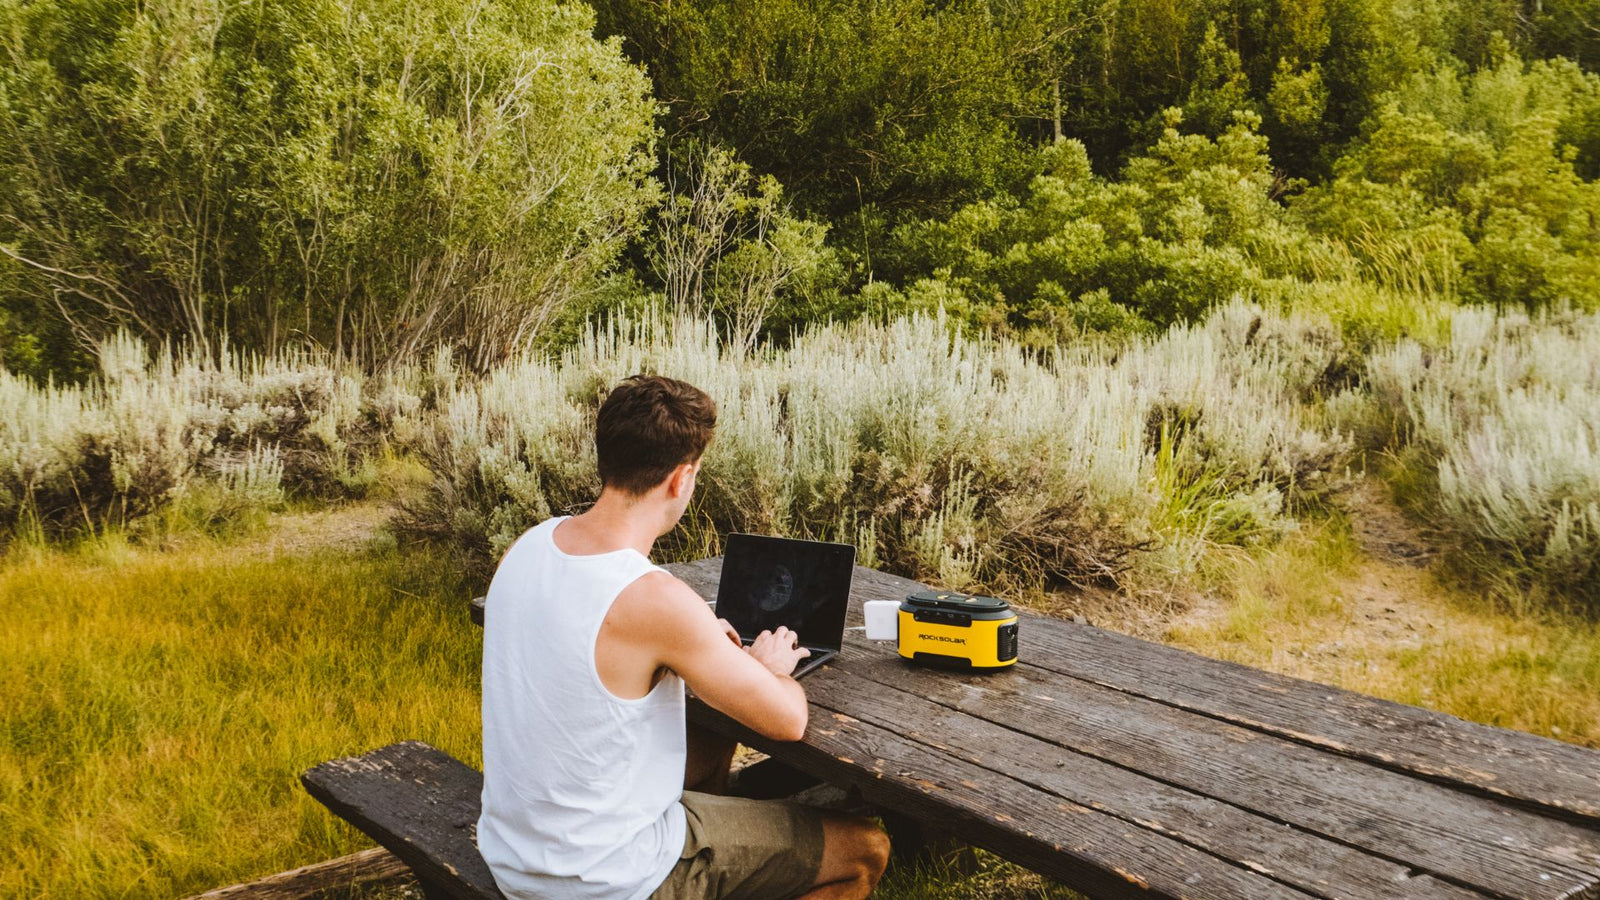 The Top 5 Portable Power Stations for Home and Outdoor Use